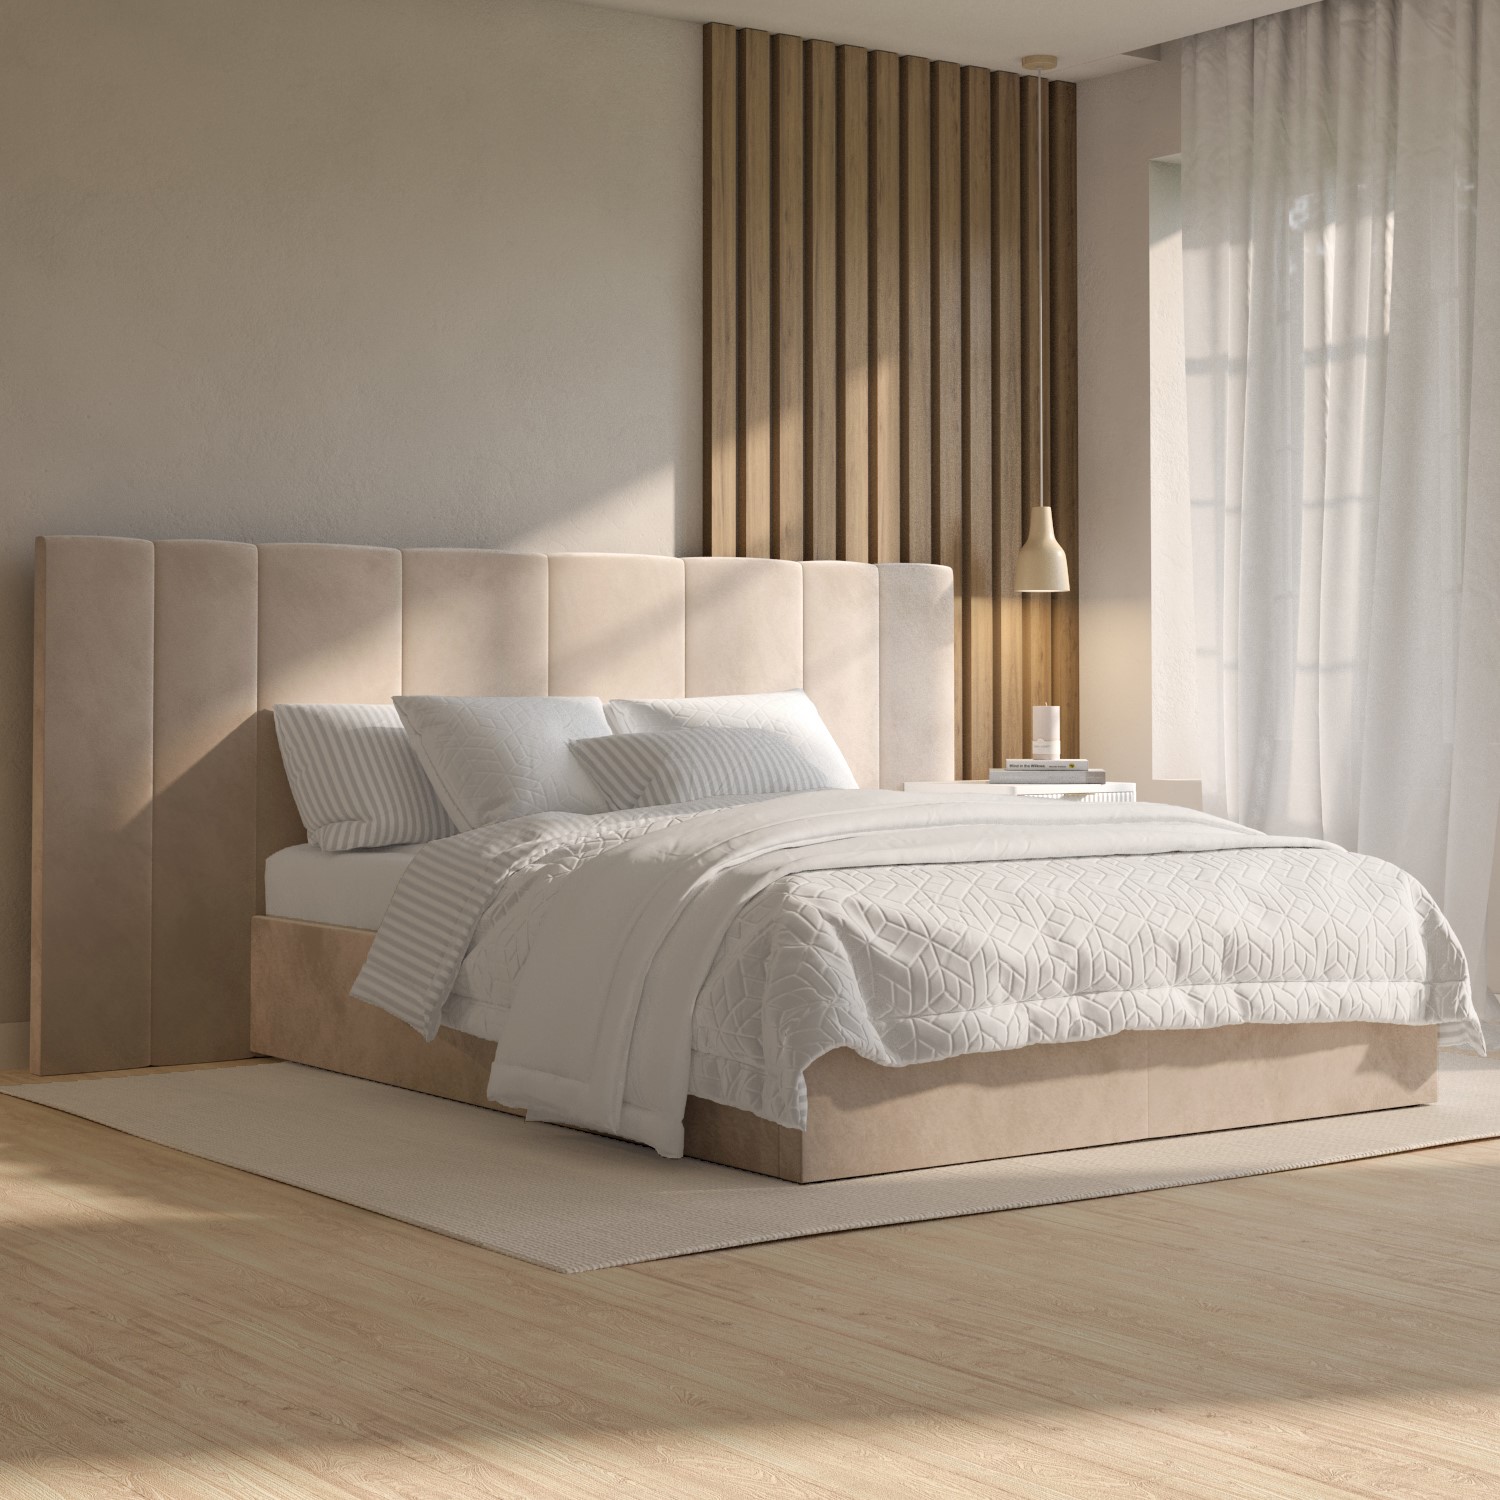 Read more about Beige velvet double ottoman bed with wide headboard iman